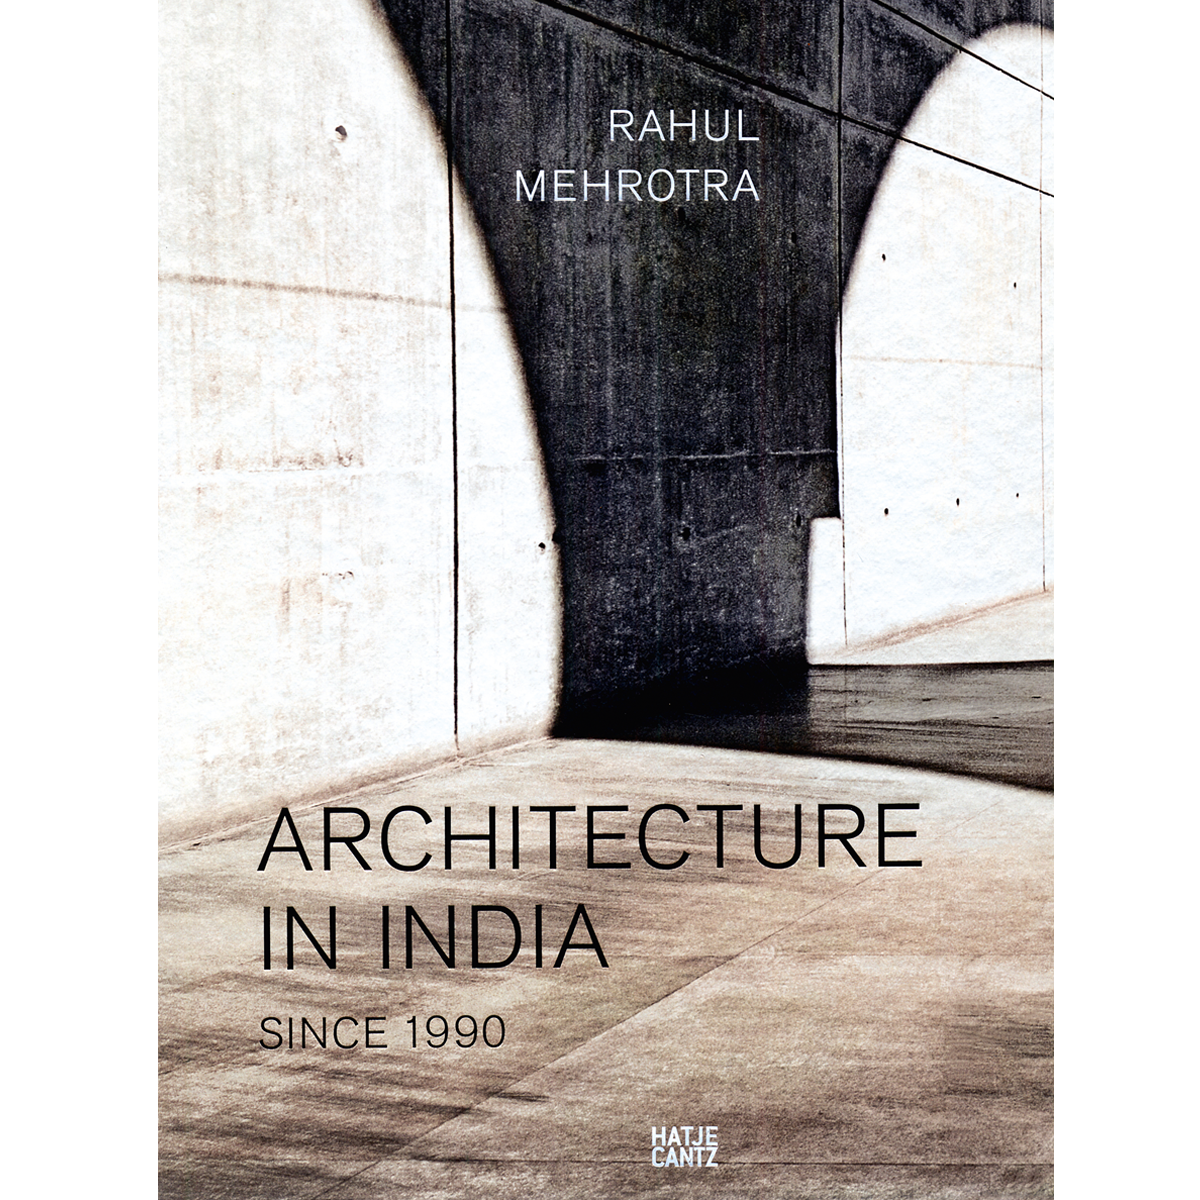 Architecture in India since 1990